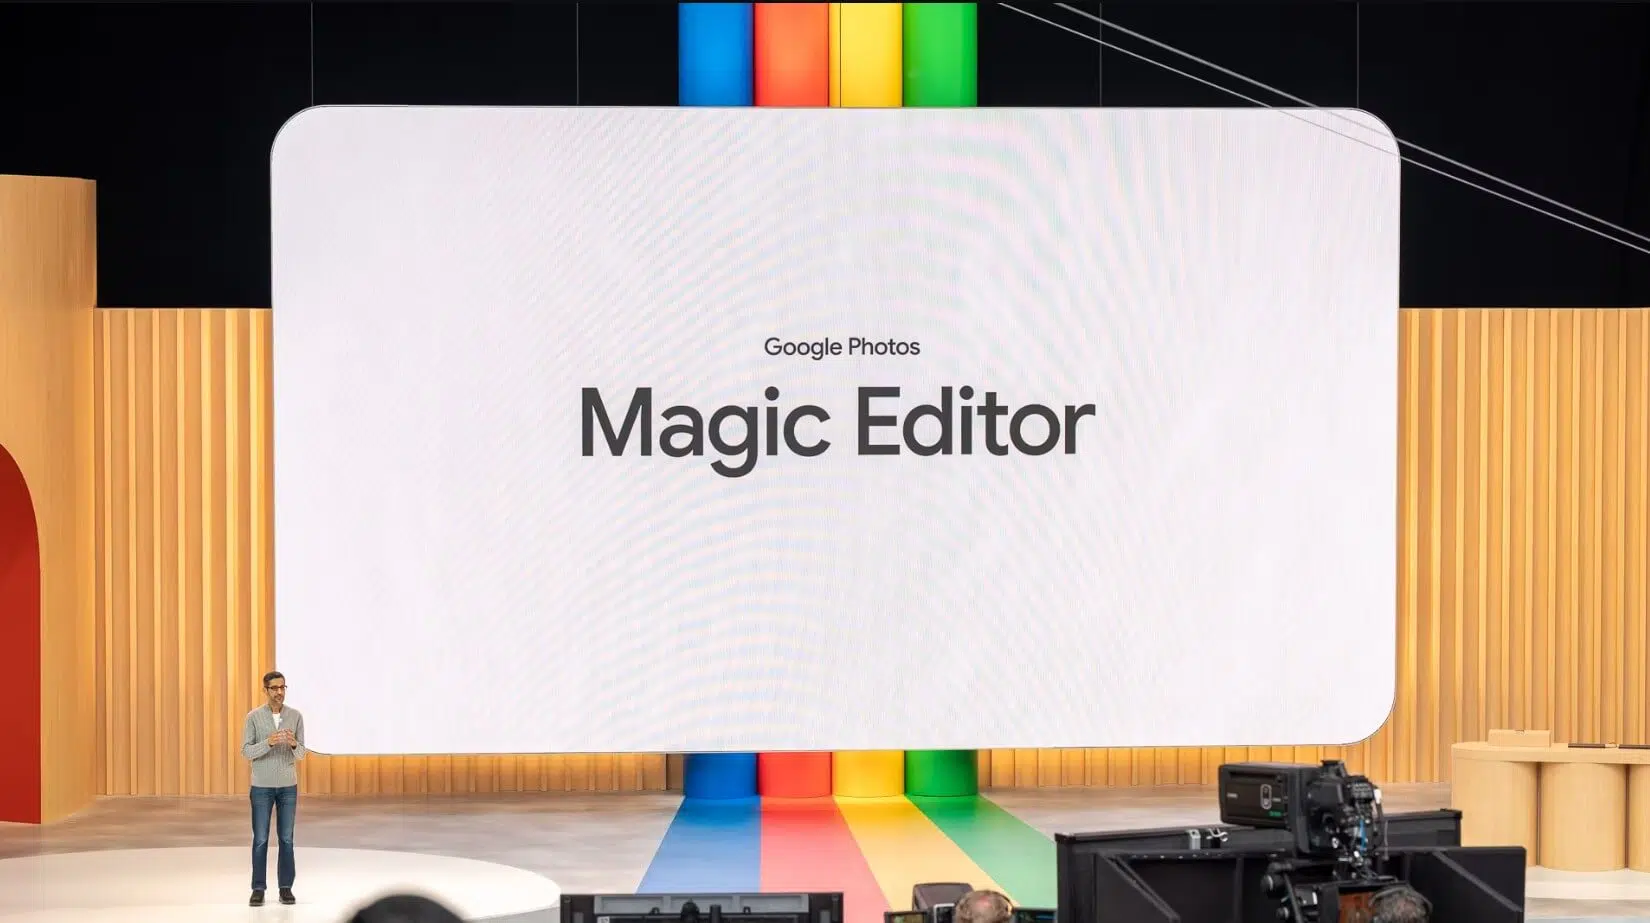 Google Magic Editor is coming soon to Pixel 6 and 7 devices